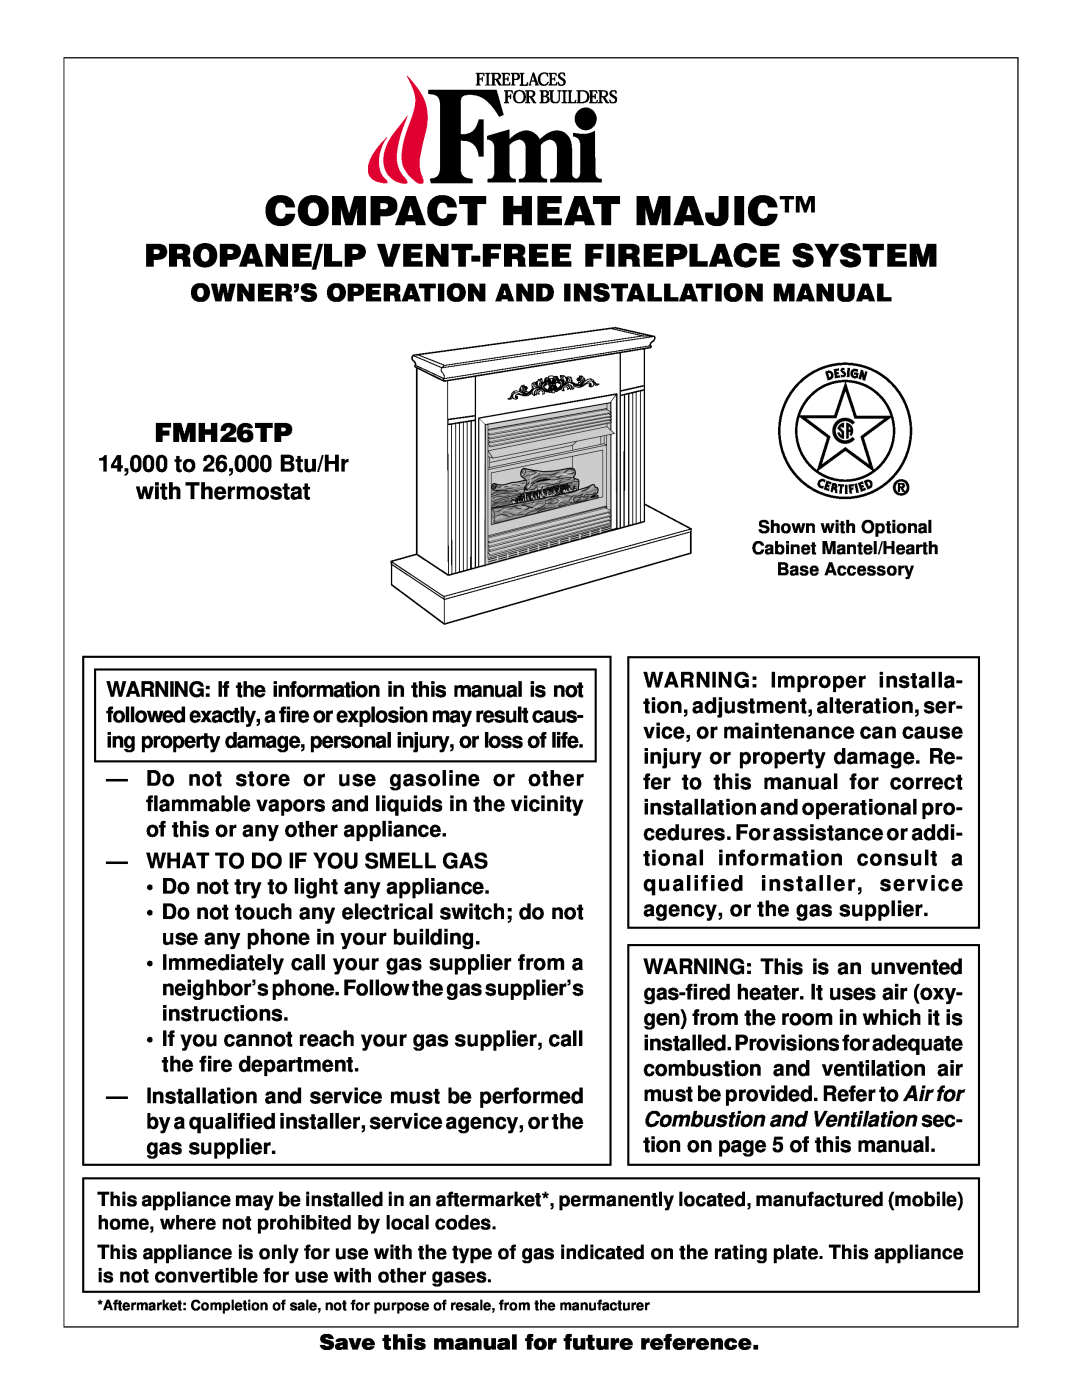 FMI FMH26TP installation manual Propane/Lp Vent-Freefireplace System, What To Do If You Smell Gas, Compact Heat Majic 